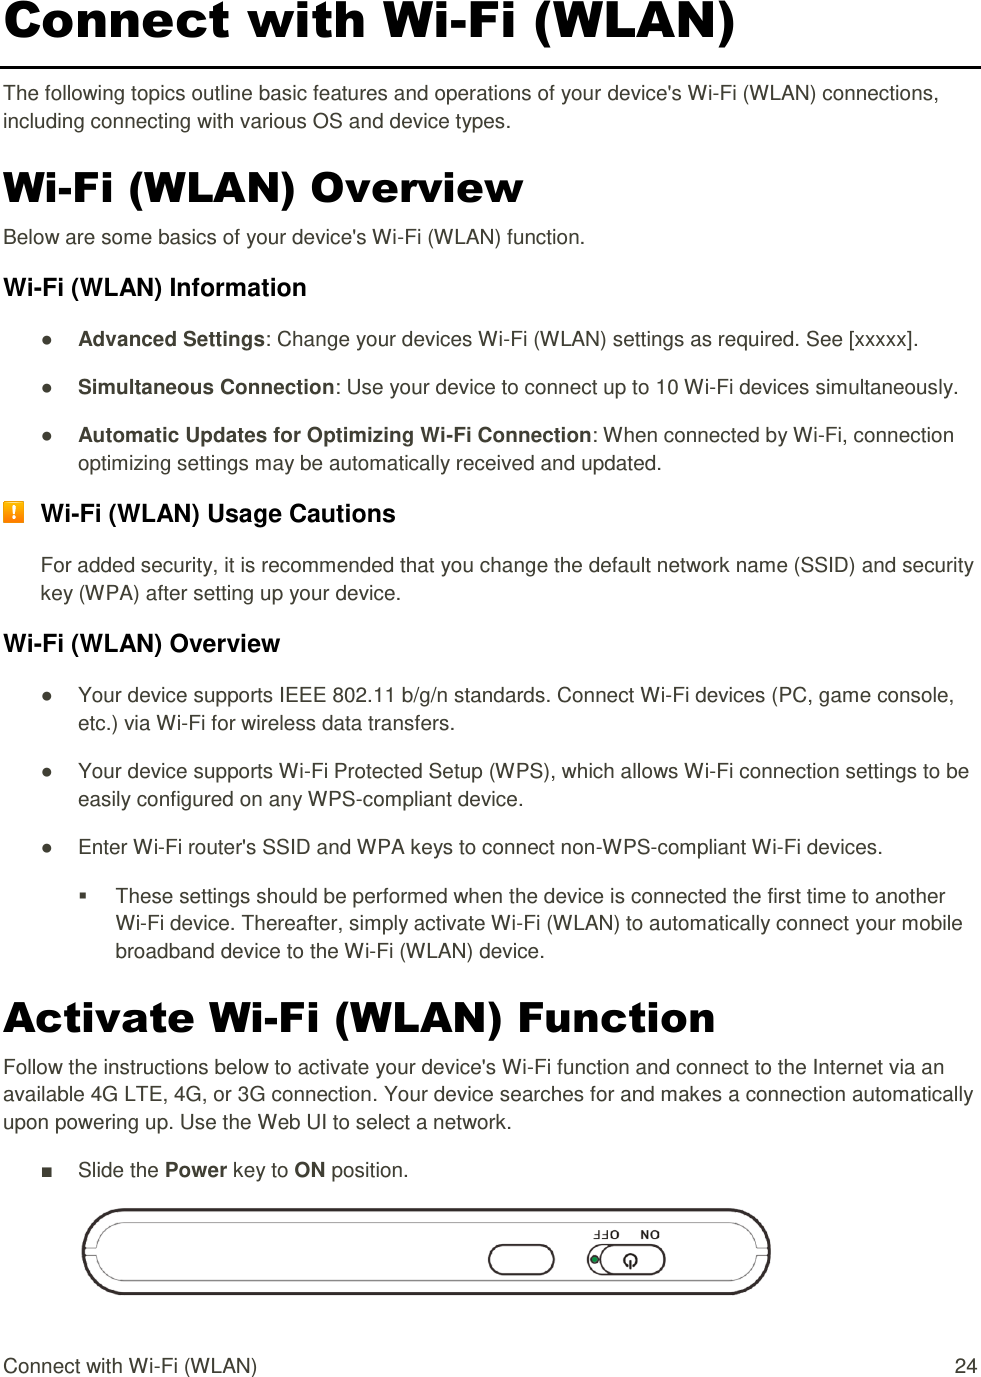 Connect with Wi-Fi (WLAN)  24 Connect with Wi-Fi (WLAN) The following topics outline basic features and operations of your device&apos;s Wi-Fi (WLAN) connections, including connecting with various OS and device types. Wi-Fi (WLAN) Overview Below are some basics of your device&apos;s Wi-Fi (WLAN) function. Wi-Fi (WLAN) Information ● Advanced Settings: Change your devices Wi-Fi (WLAN) settings as required. See [xxxxx]. ● Simultaneous Connection: Use your device to connect up to 10 Wi-Fi devices simultaneously.  ● Automatic Updates for Optimizing Wi-Fi Connection: When connected by Wi-Fi, connection optimizing settings may be automatically received and updated.  Wi-Fi (WLAN) Usage Cautions For added security, it is recommended that you change the default network name (SSID) and security key (WPA) after setting up your device. Wi-Fi (WLAN) Overview  ●  Your device supports IEEE 802.11 b/g/n standards. Connect Wi-Fi devices (PC, game console, etc.) via Wi-Fi for wireless data transfers. ●  Your device supports Wi-Fi Protected Setup (WPS), which allows Wi-Fi connection settings to be easily configured on any WPS-compliant device. ●  Enter Wi-Fi router&apos;s SSID and WPA keys to connect non-WPS-compliant Wi-Fi devices.   These settings should be performed when the device is connected the first time to another Wi-Fi device. Thereafter, simply activate Wi-Fi (WLAN) to automatically connect your mobile broadband device to the Wi-Fi (WLAN) device.  Activate Wi-Fi (WLAN) Function Follow the instructions below to activate your device&apos;s Wi-Fi function and connect to the Internet via an available 4G LTE, 4G, or 3G connection. Your device searches for and makes a connection automatically upon powering up. Use the Web UI to select a network. ■  Slide the Power key to ON position.  